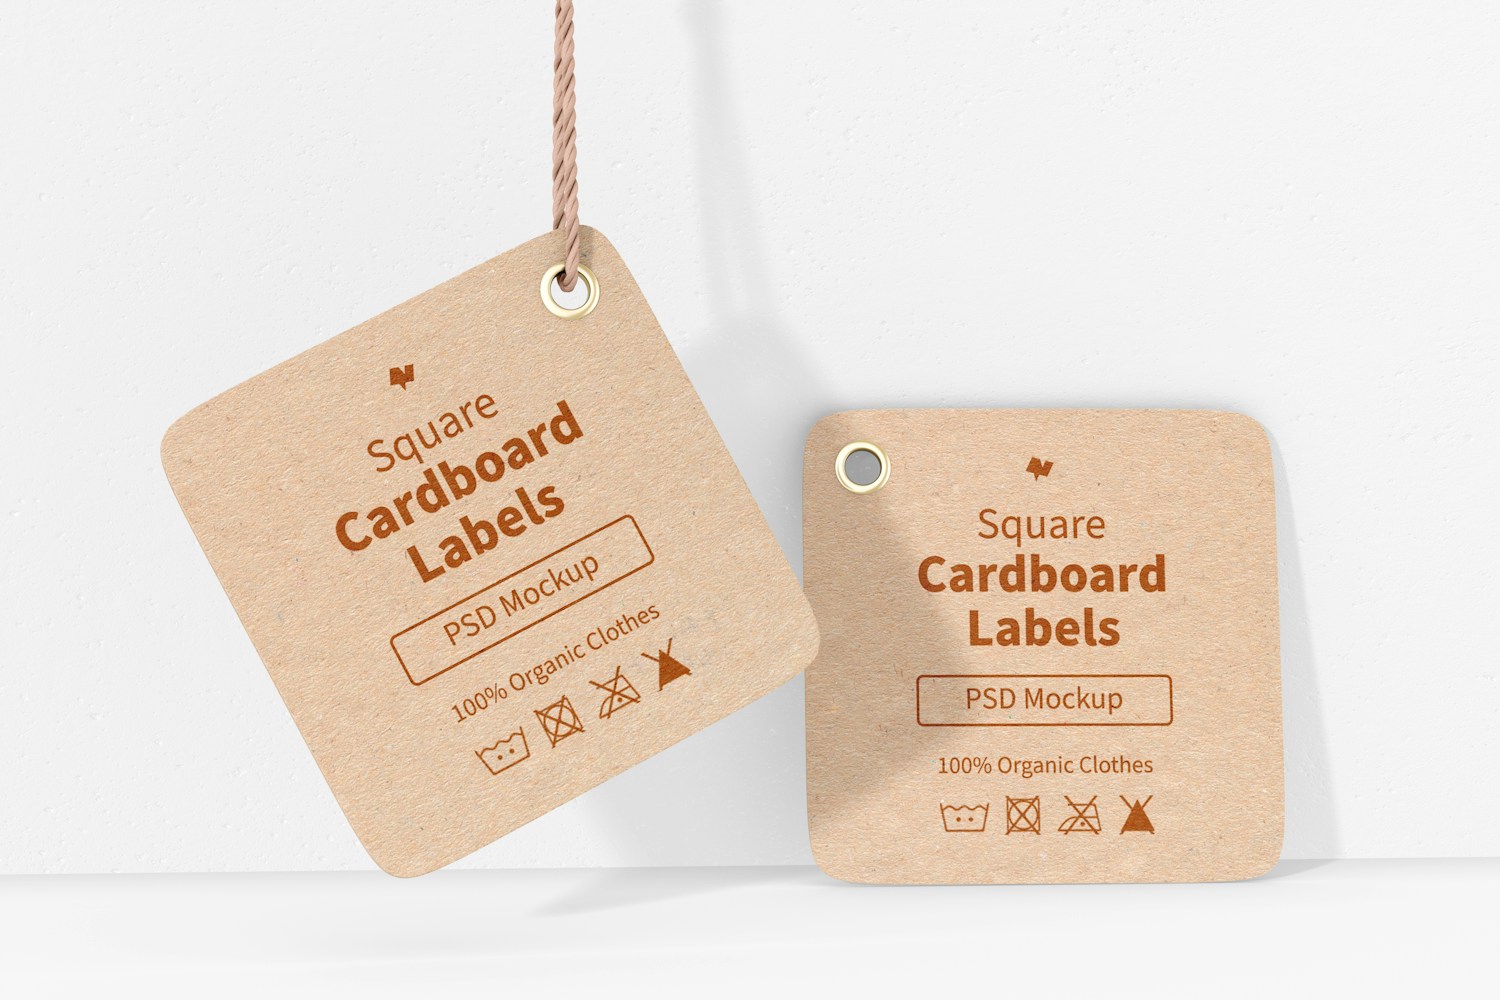 Square Cardboard Labels with Rope Mockup, Perspective